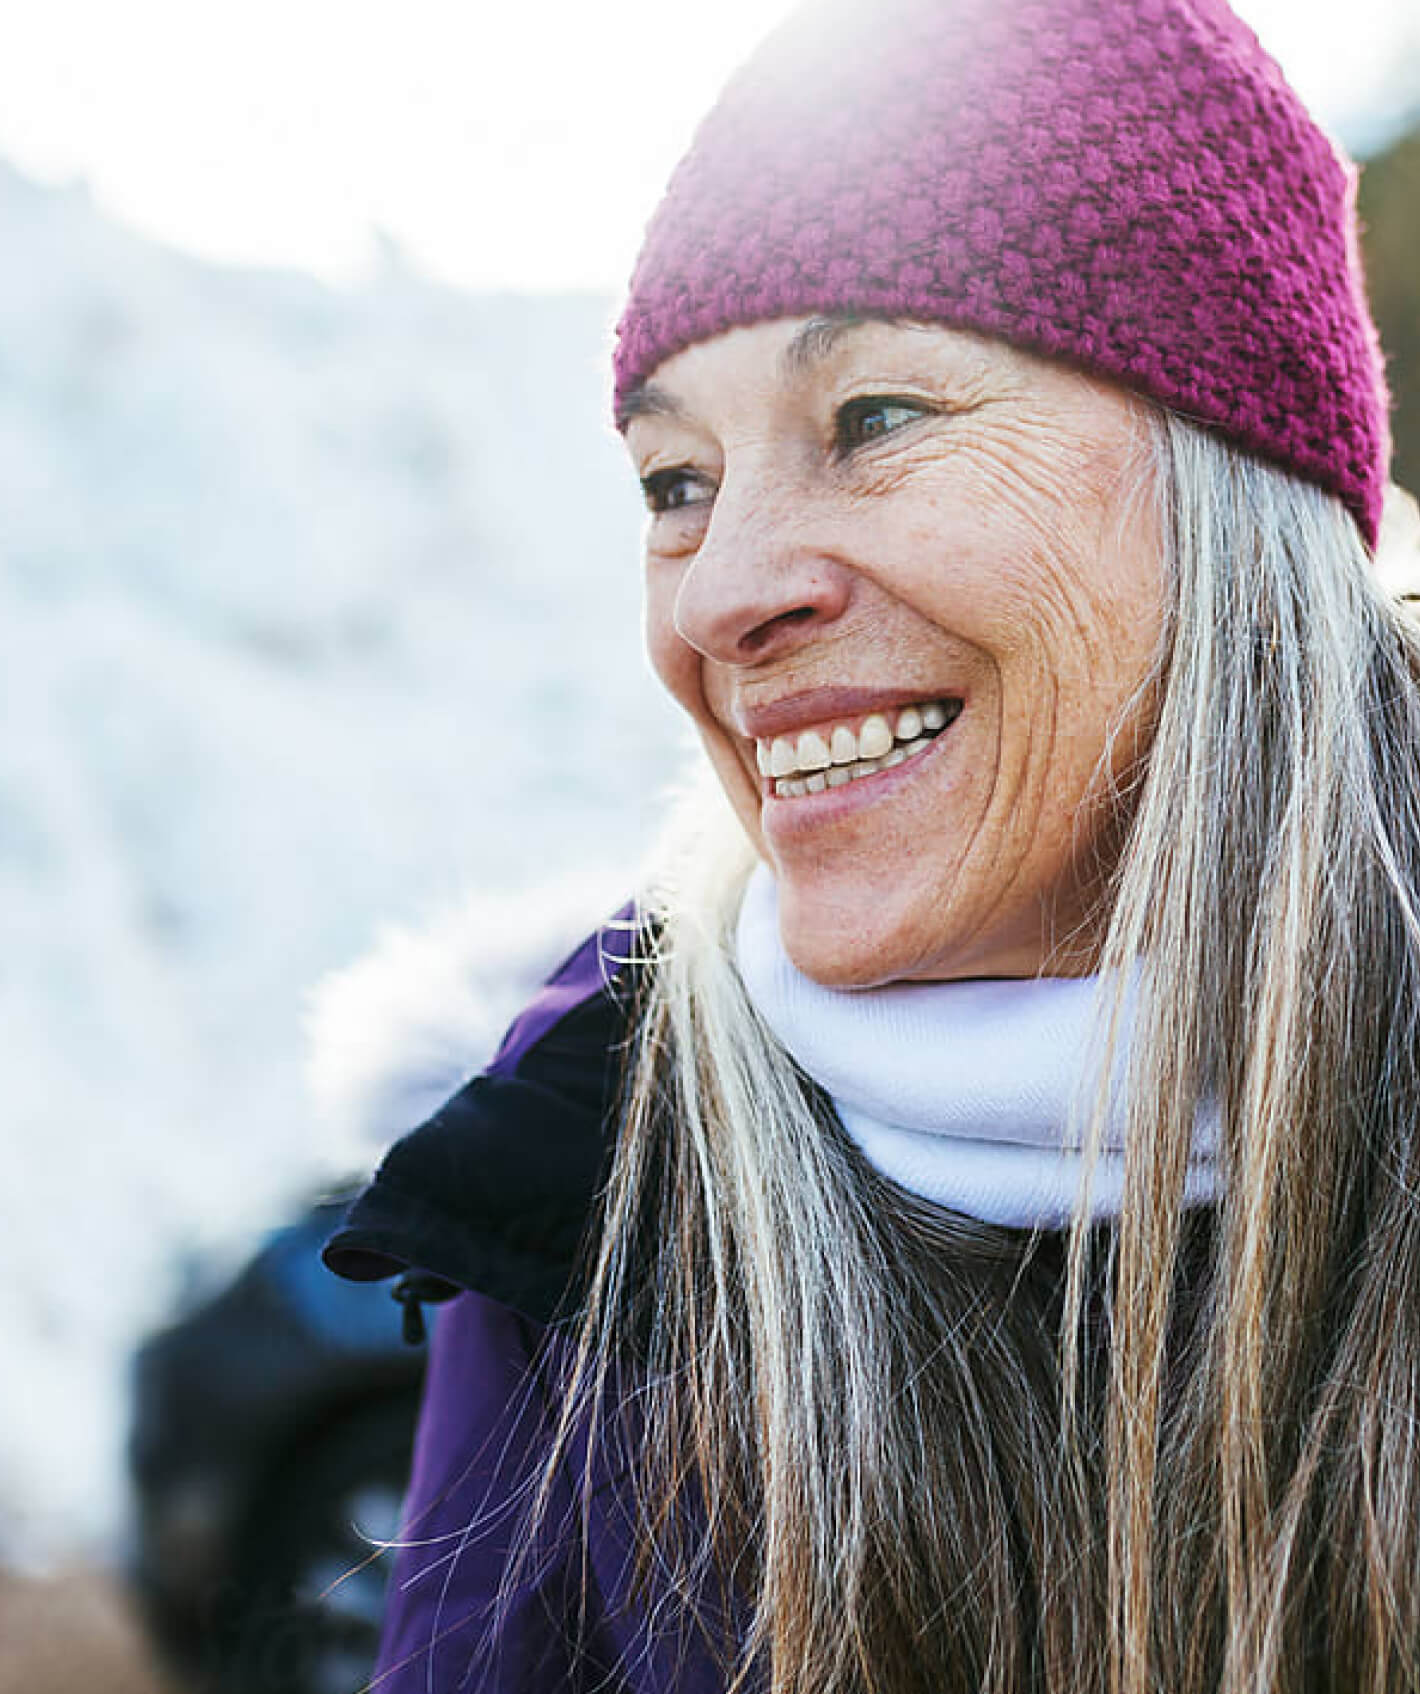 Smiling older woman with gray hair in pink knit cap and purple jacket outside.